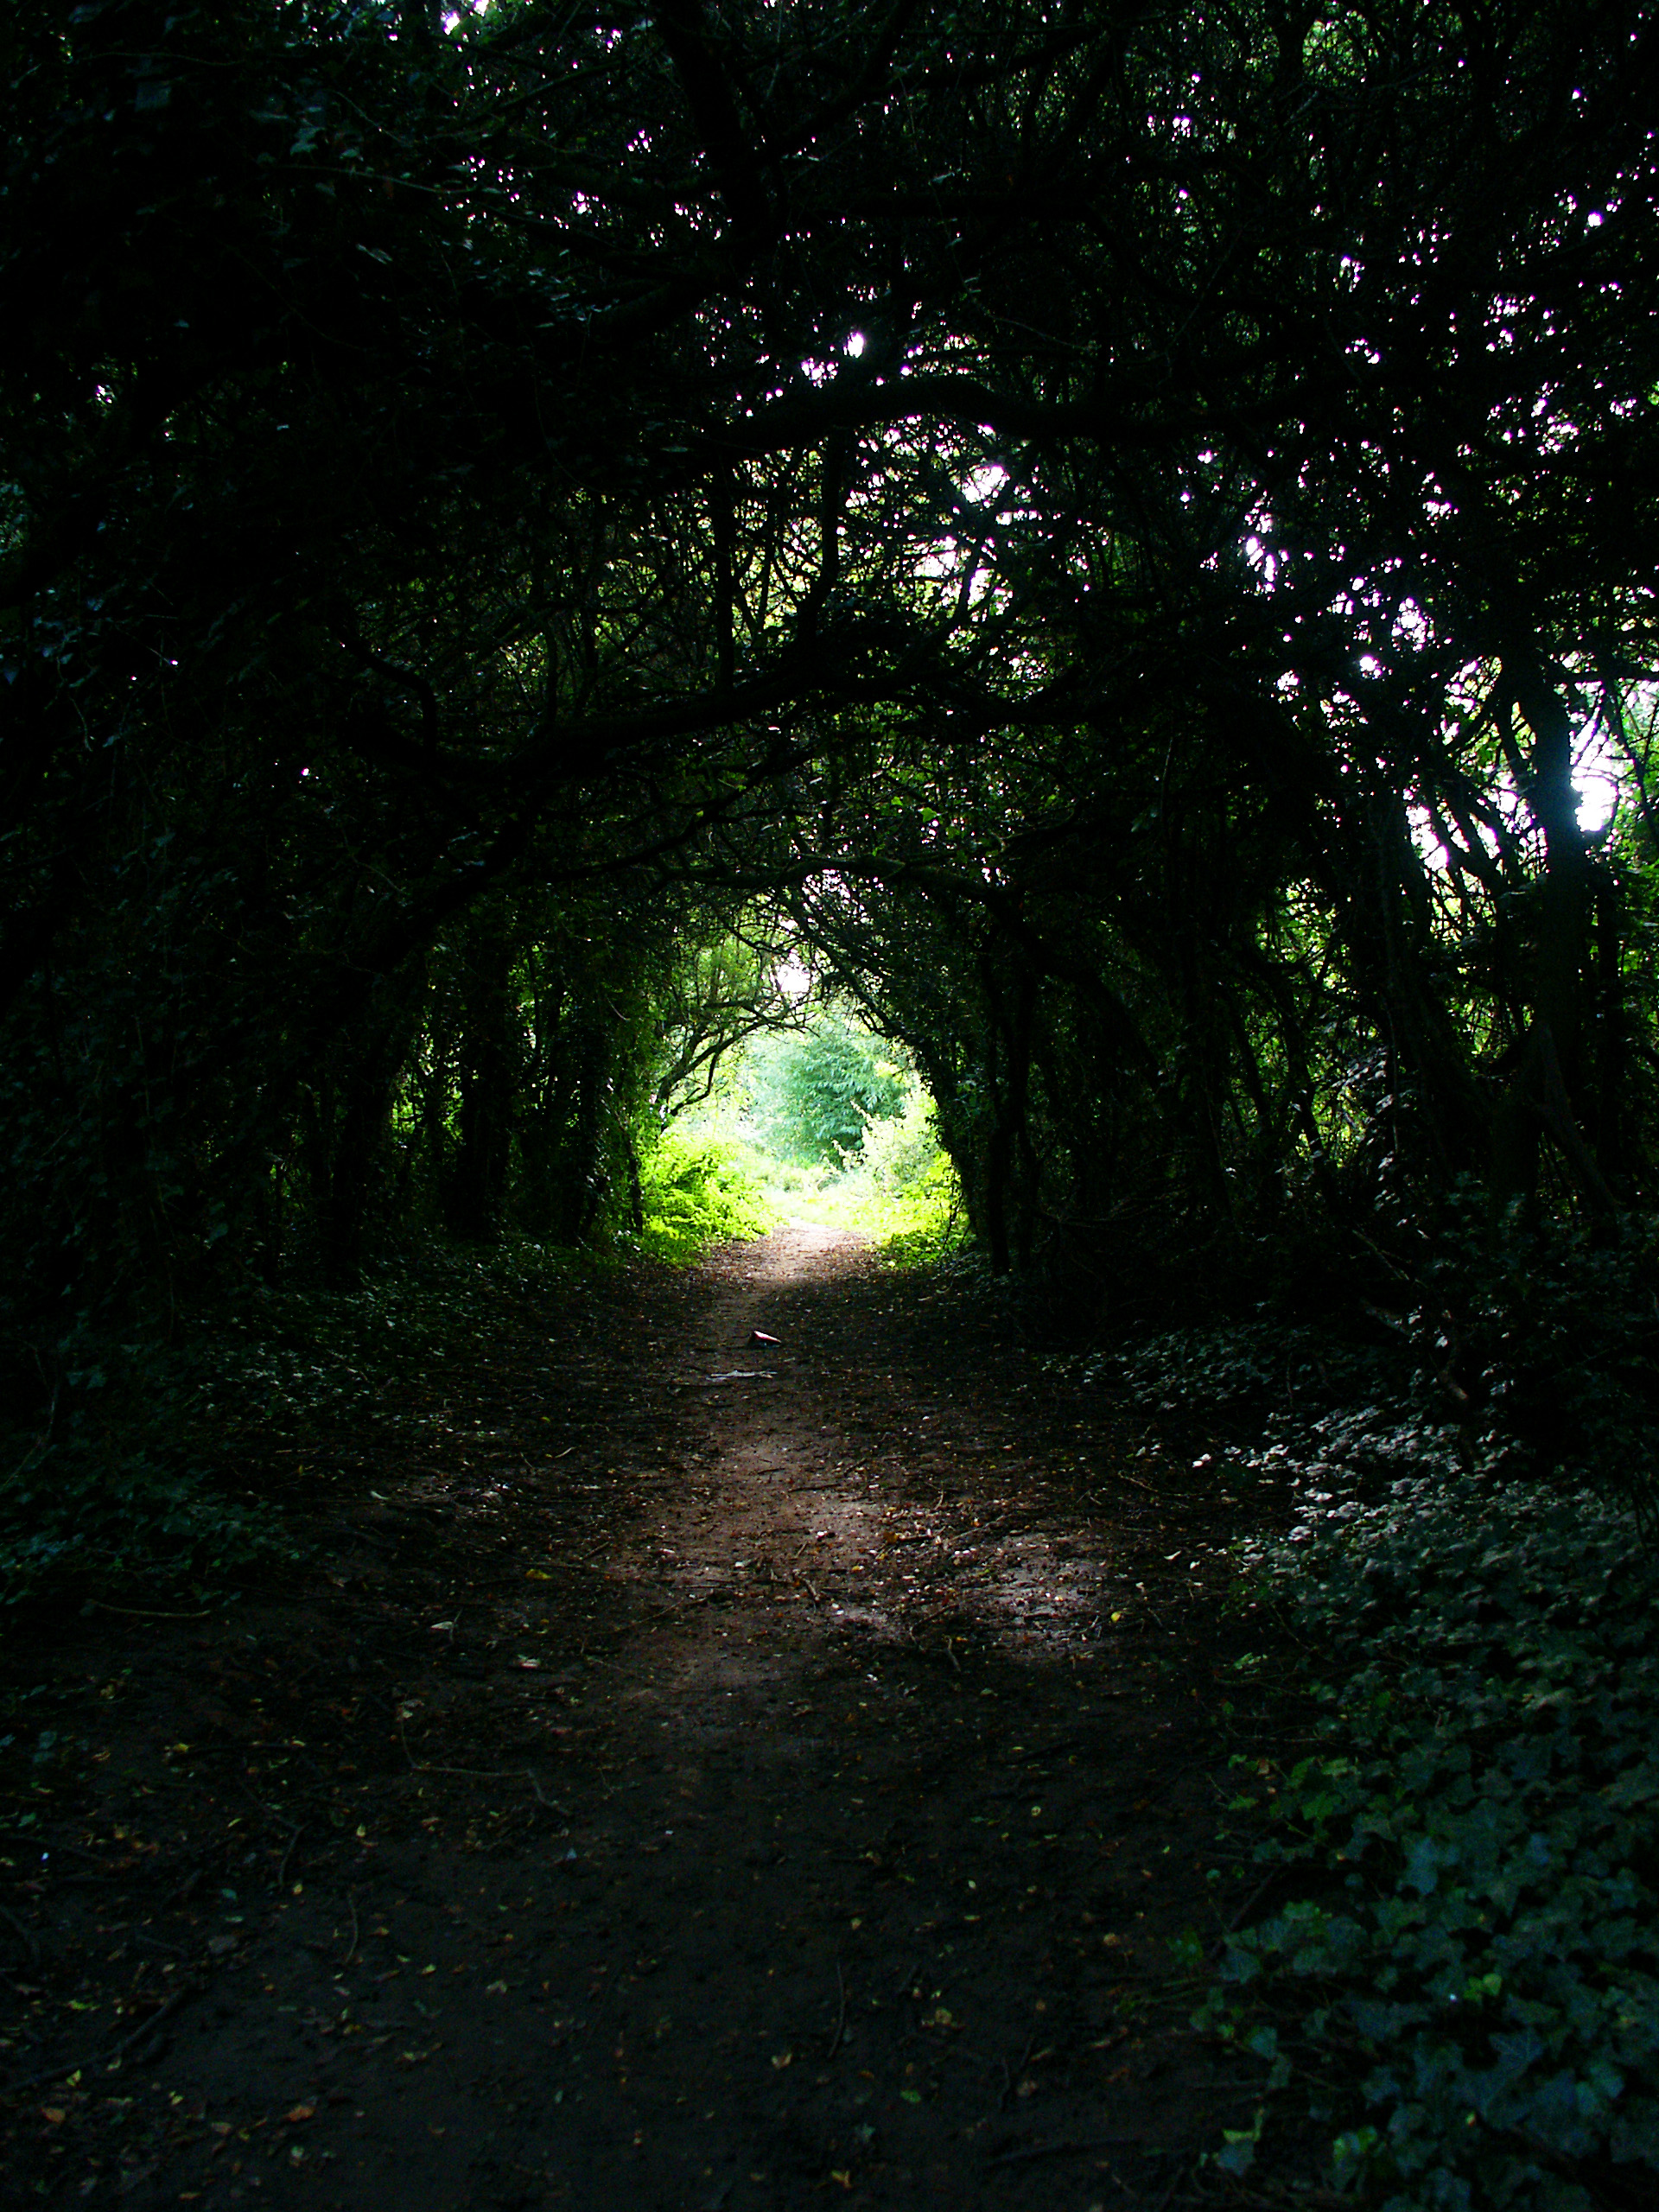 There is light at the end of the tunnel! photo